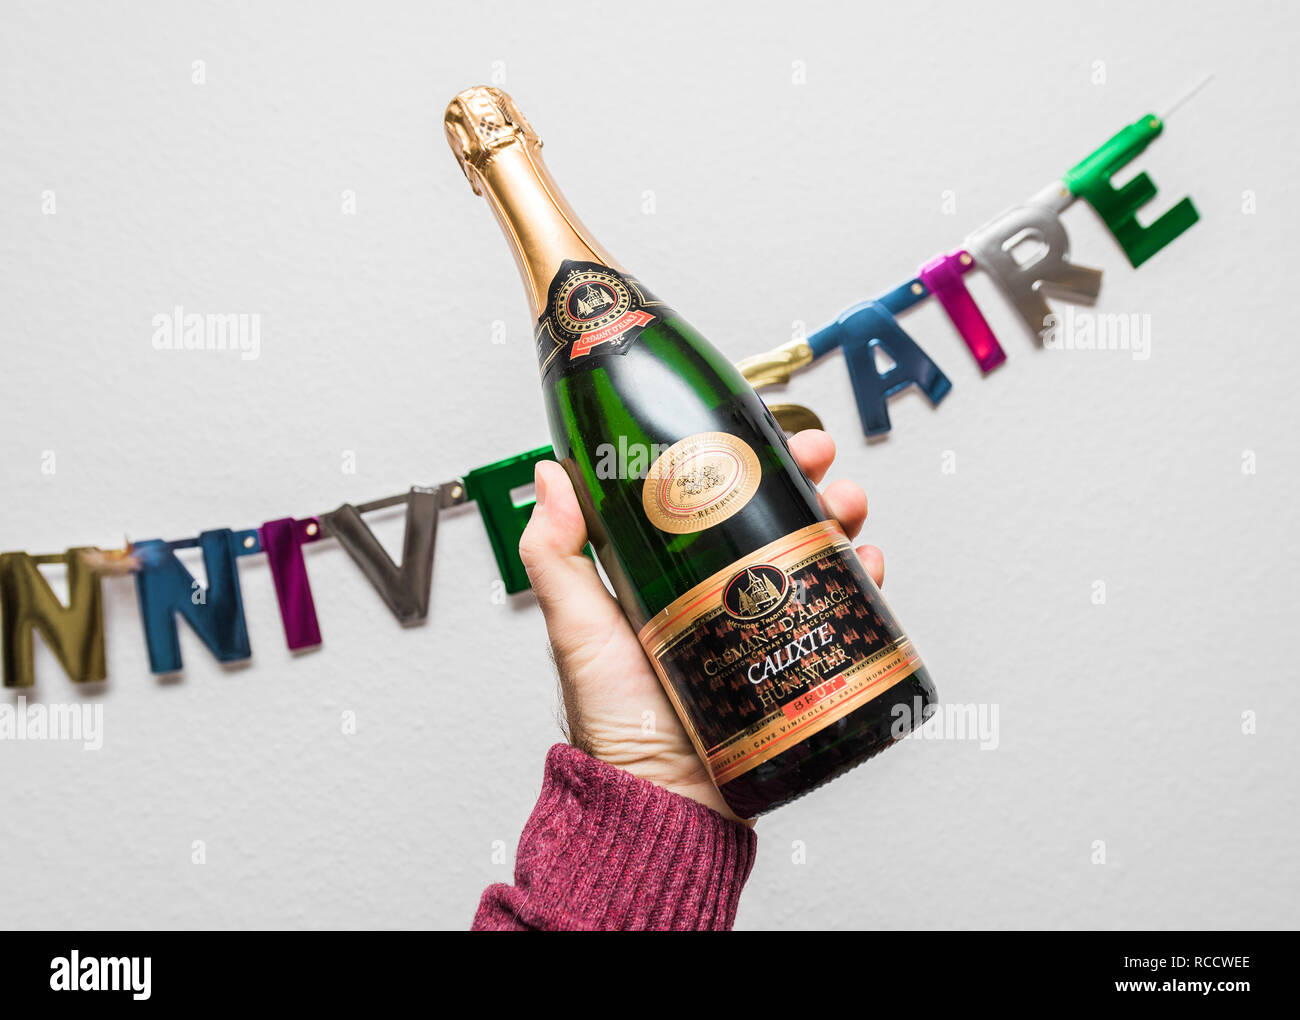 Paris France Jan 6 18 Cremant D Alsace Calixte Hunawihr In Male Hand Against Joyeux Anniversaire Text Translated As Happy Birthday Party Stock Photo Alamy